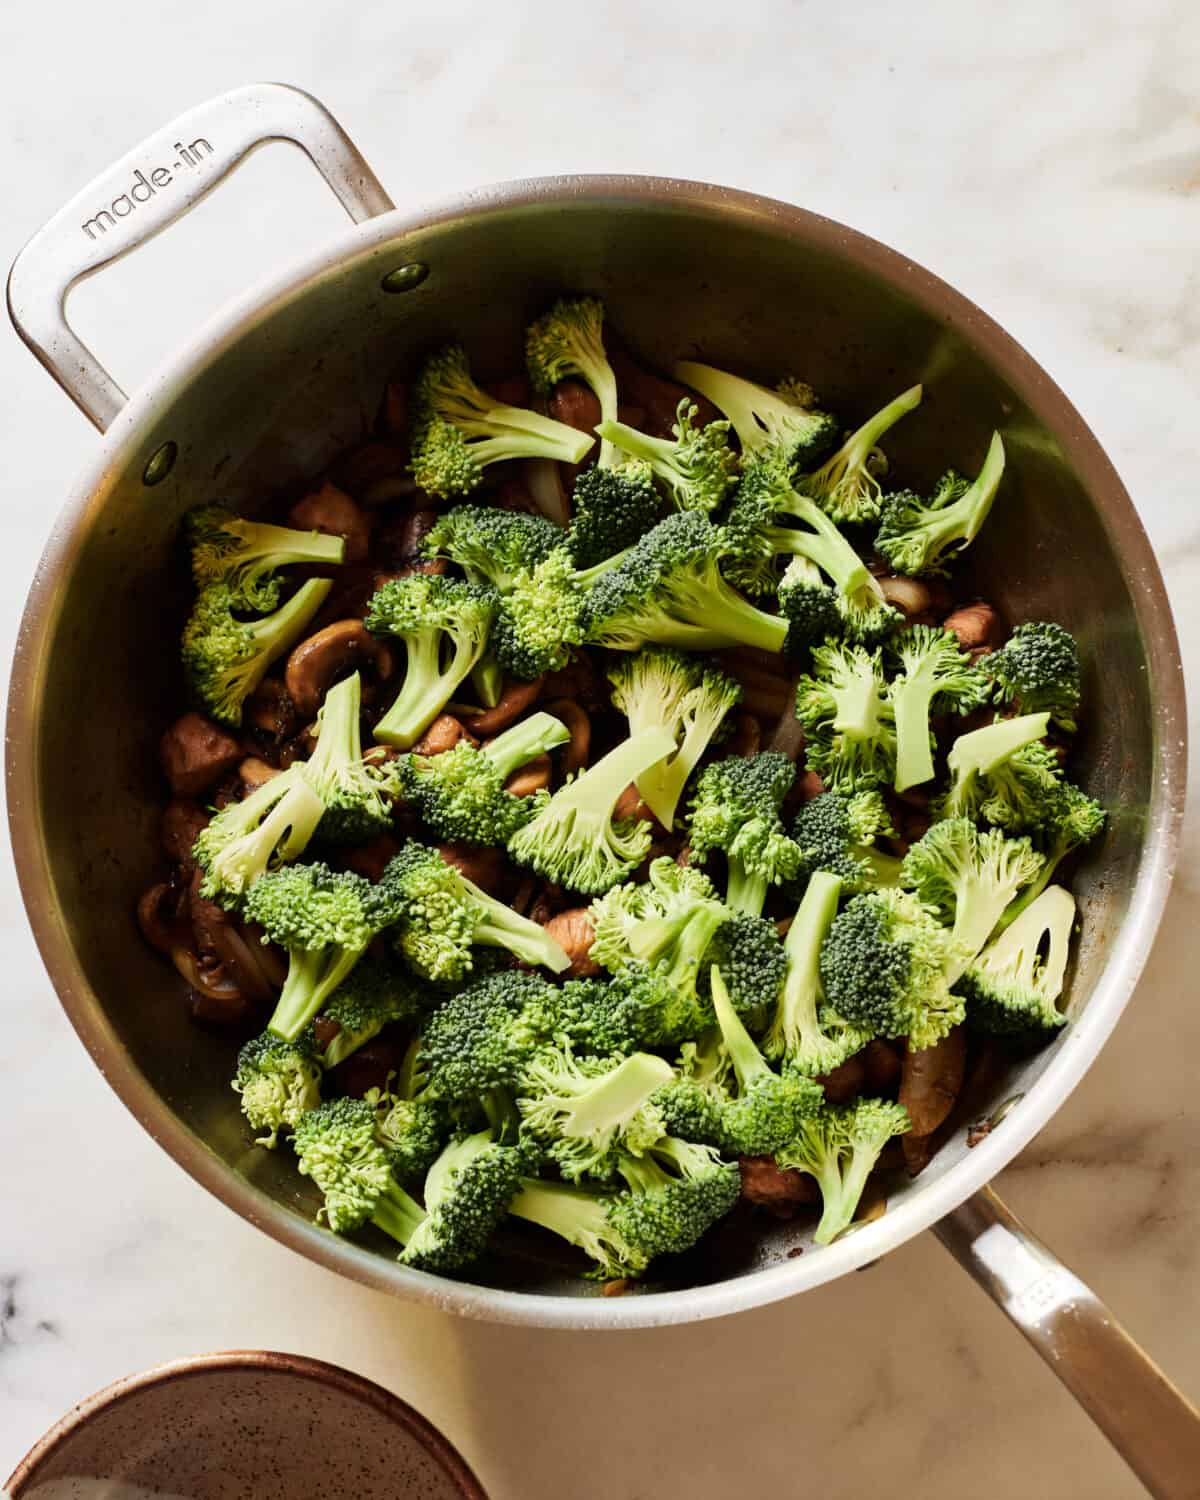 Broccoli being added to pan with the stir-fry.